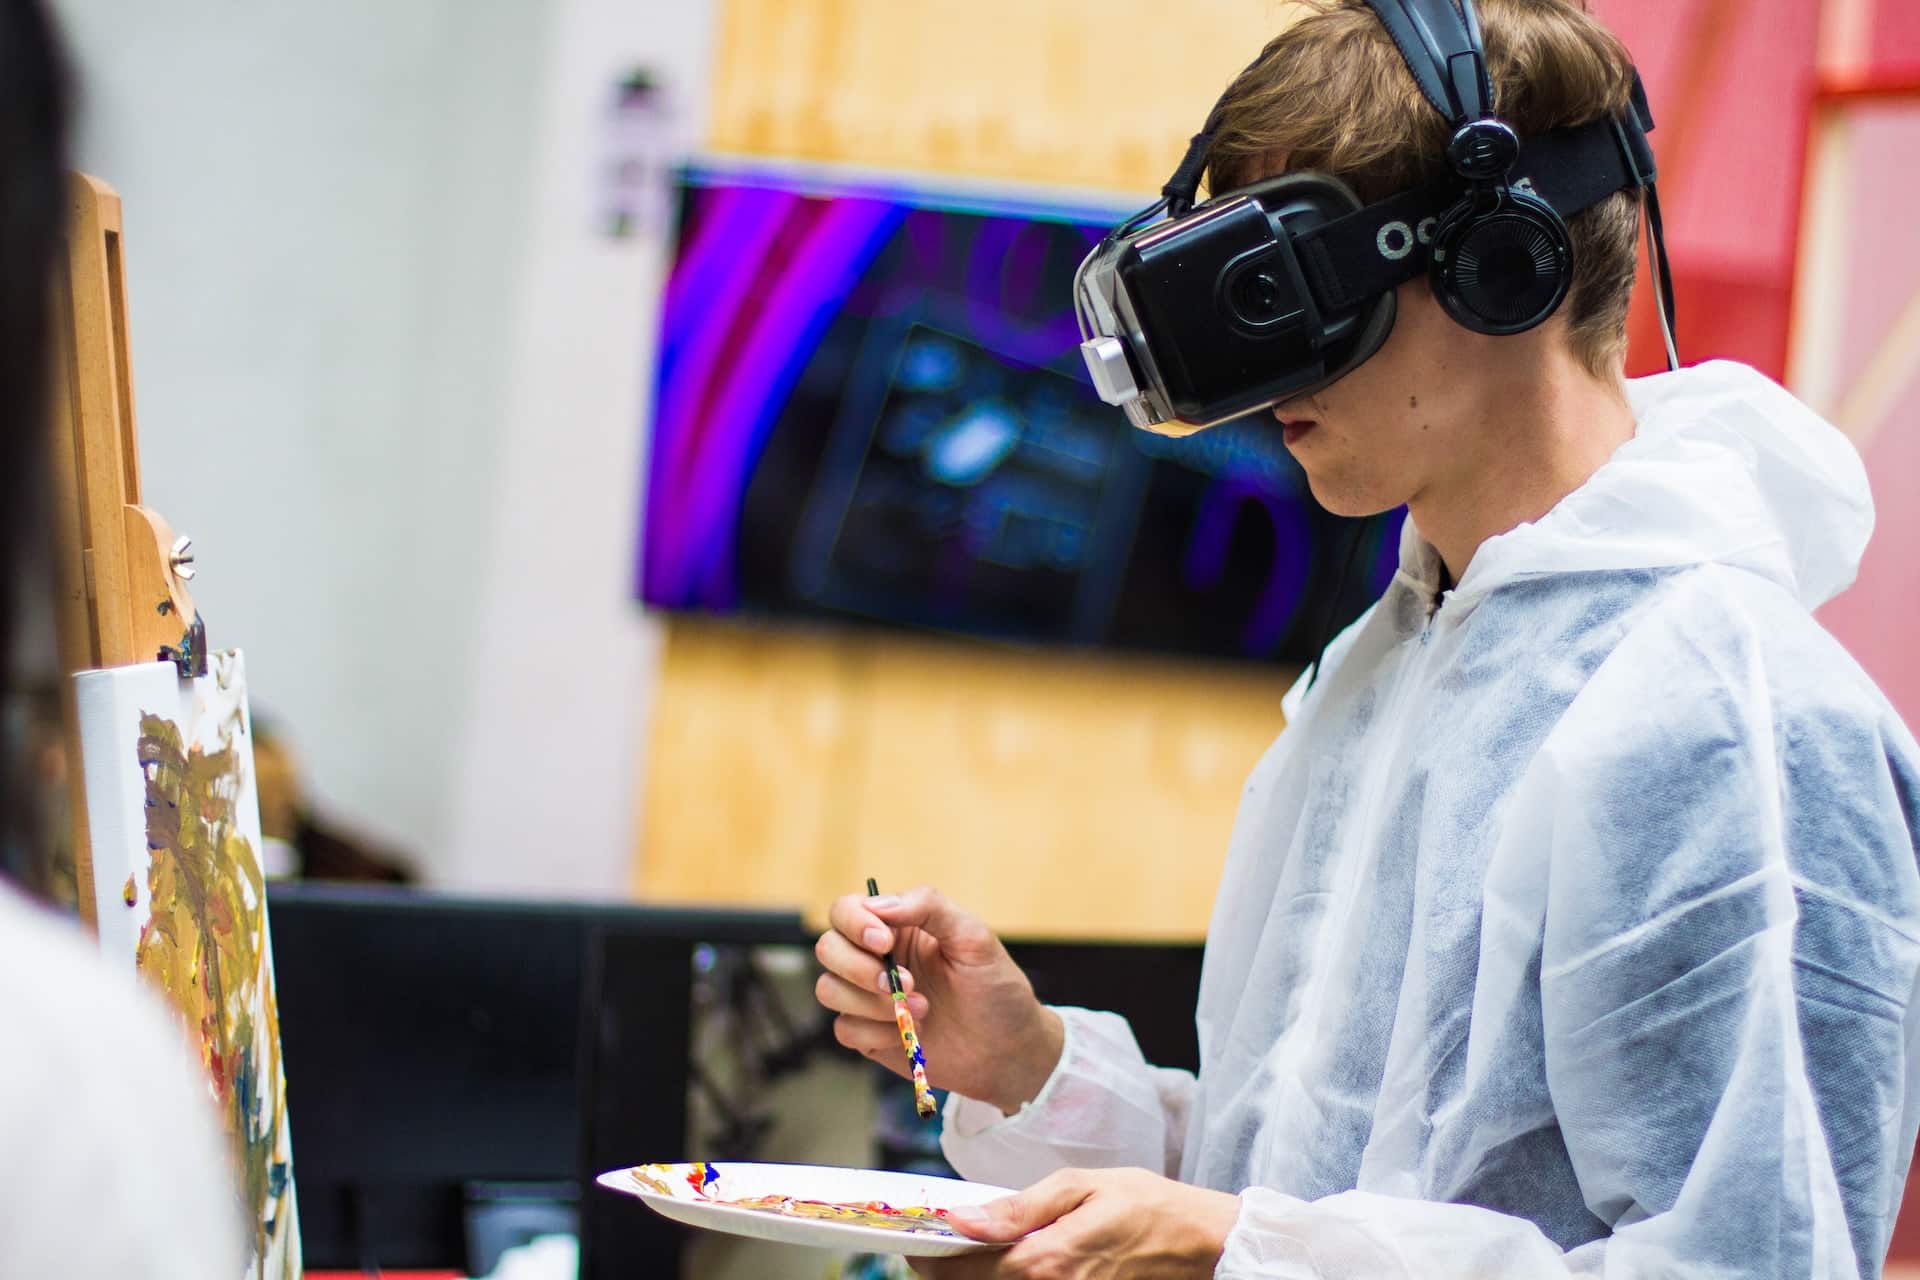 Image Title: VR in Creative Innovation Image Description: An artist immersed in a virtual reality environment at a product launch Alt Text: VR painting innovation Source: https://unsplash.com/photos/man-wearing-black-virtual-reality-headset-while-painting-near-brown-wall-3eAByt3-eOw